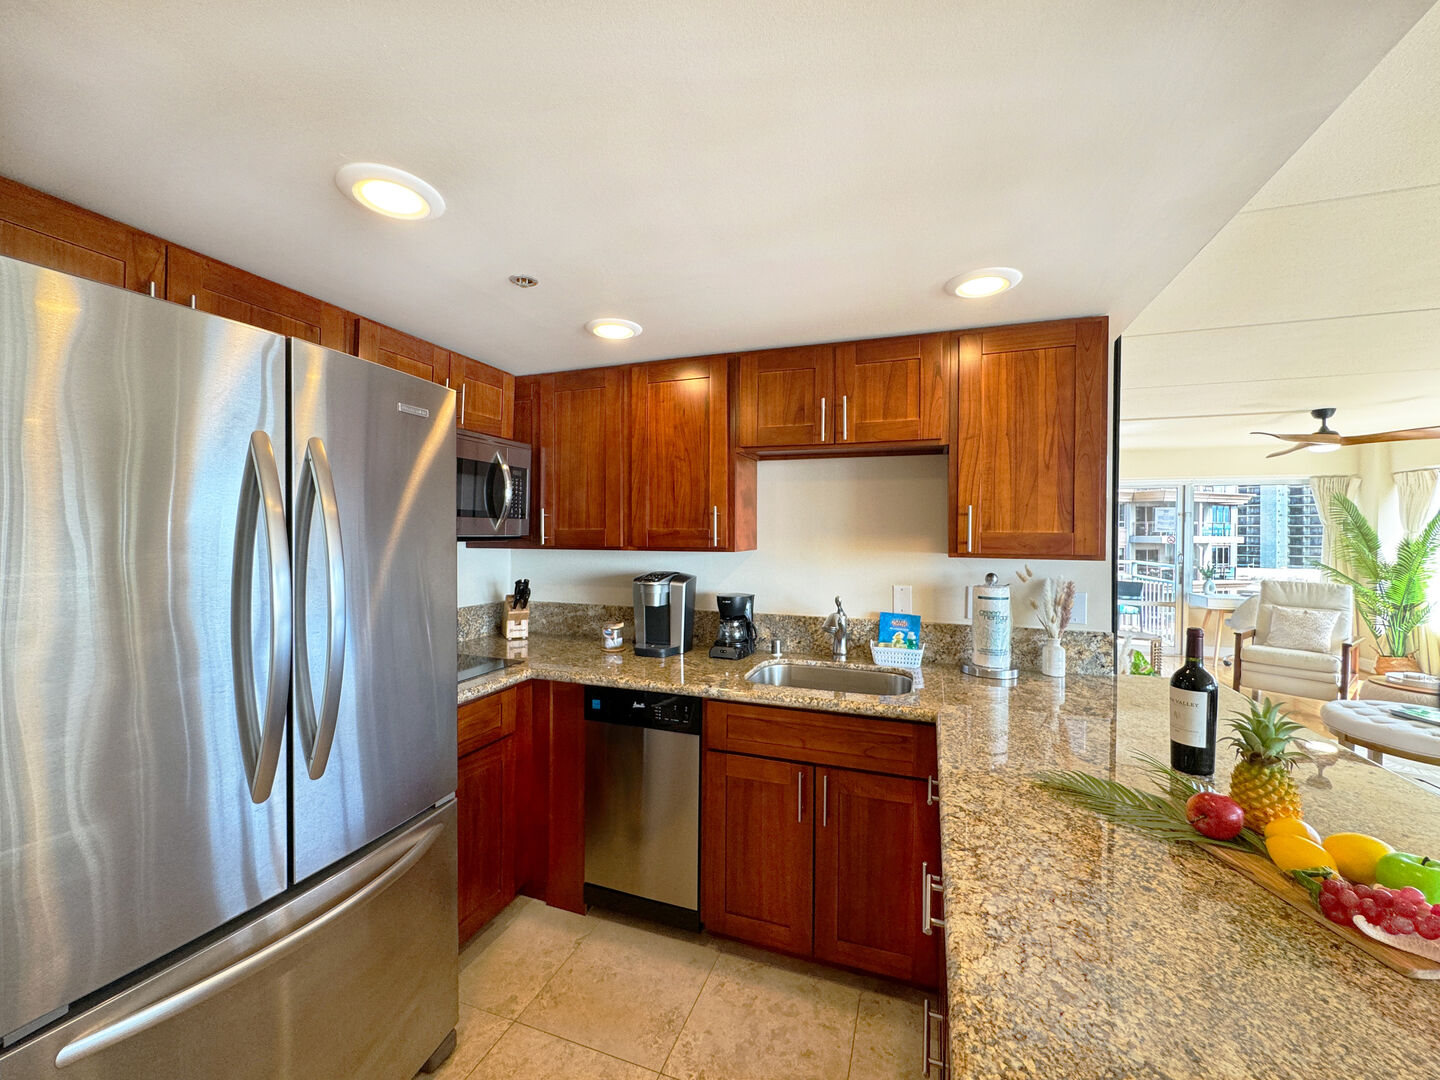 Fully equipped kitchen perfect for your culinary needs.